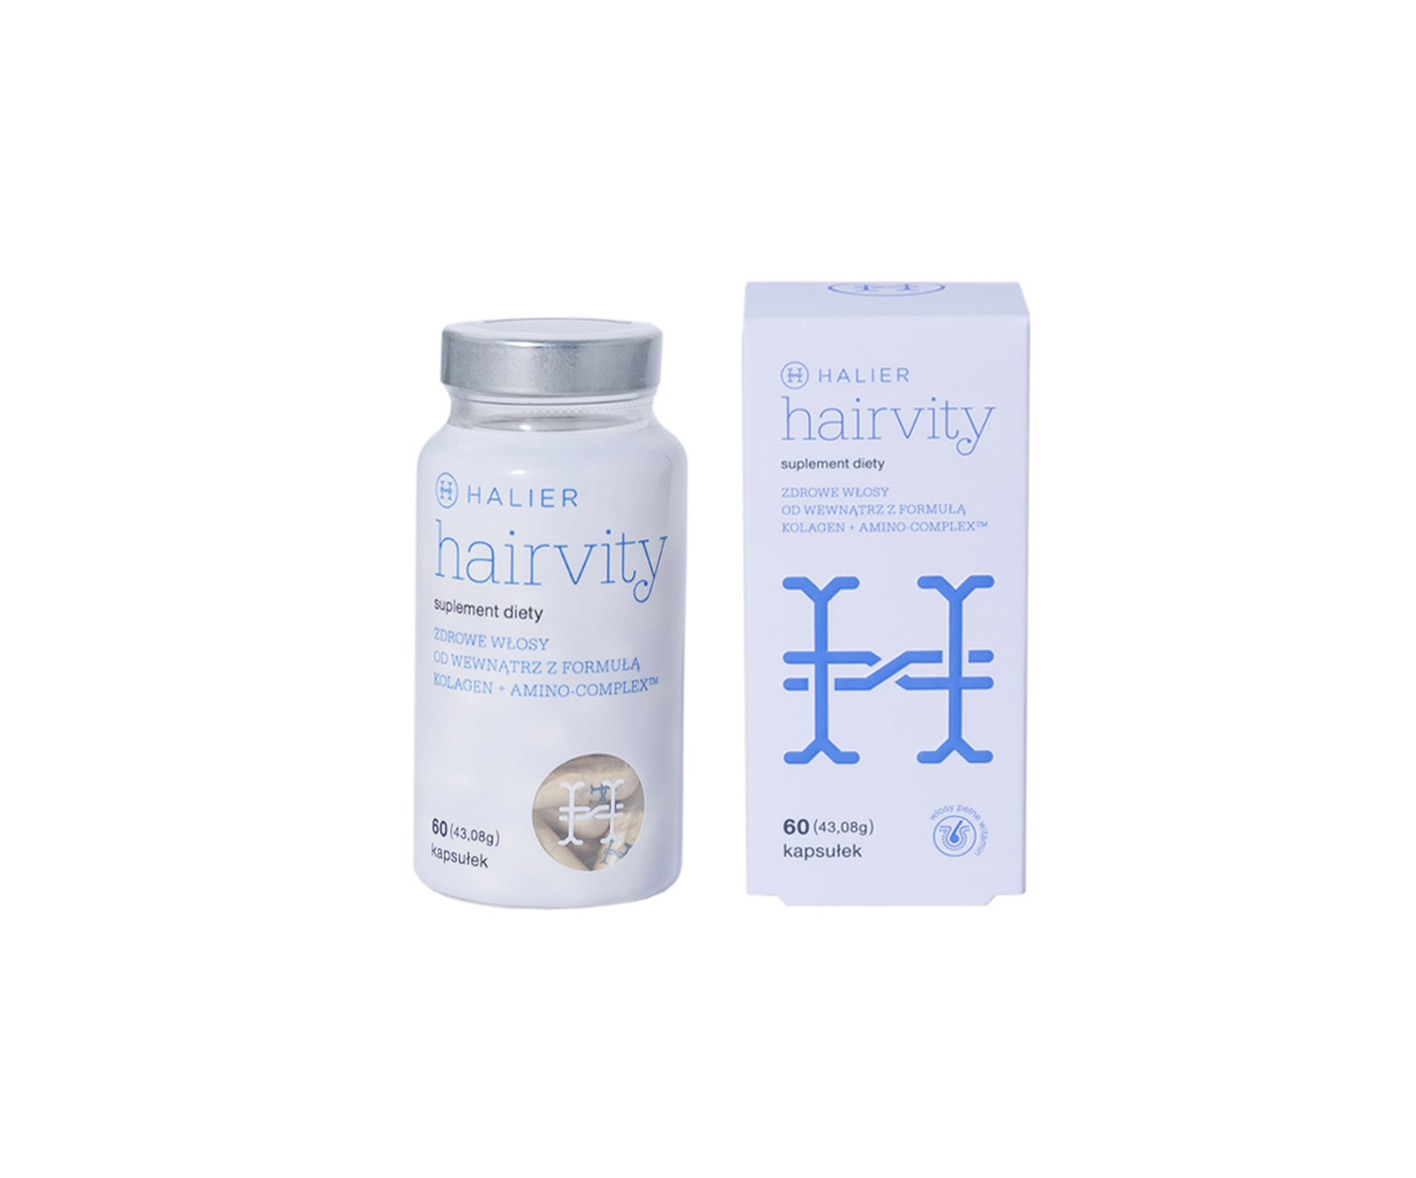 Halier, Hairvity, supplement for hair loss after pregnancy